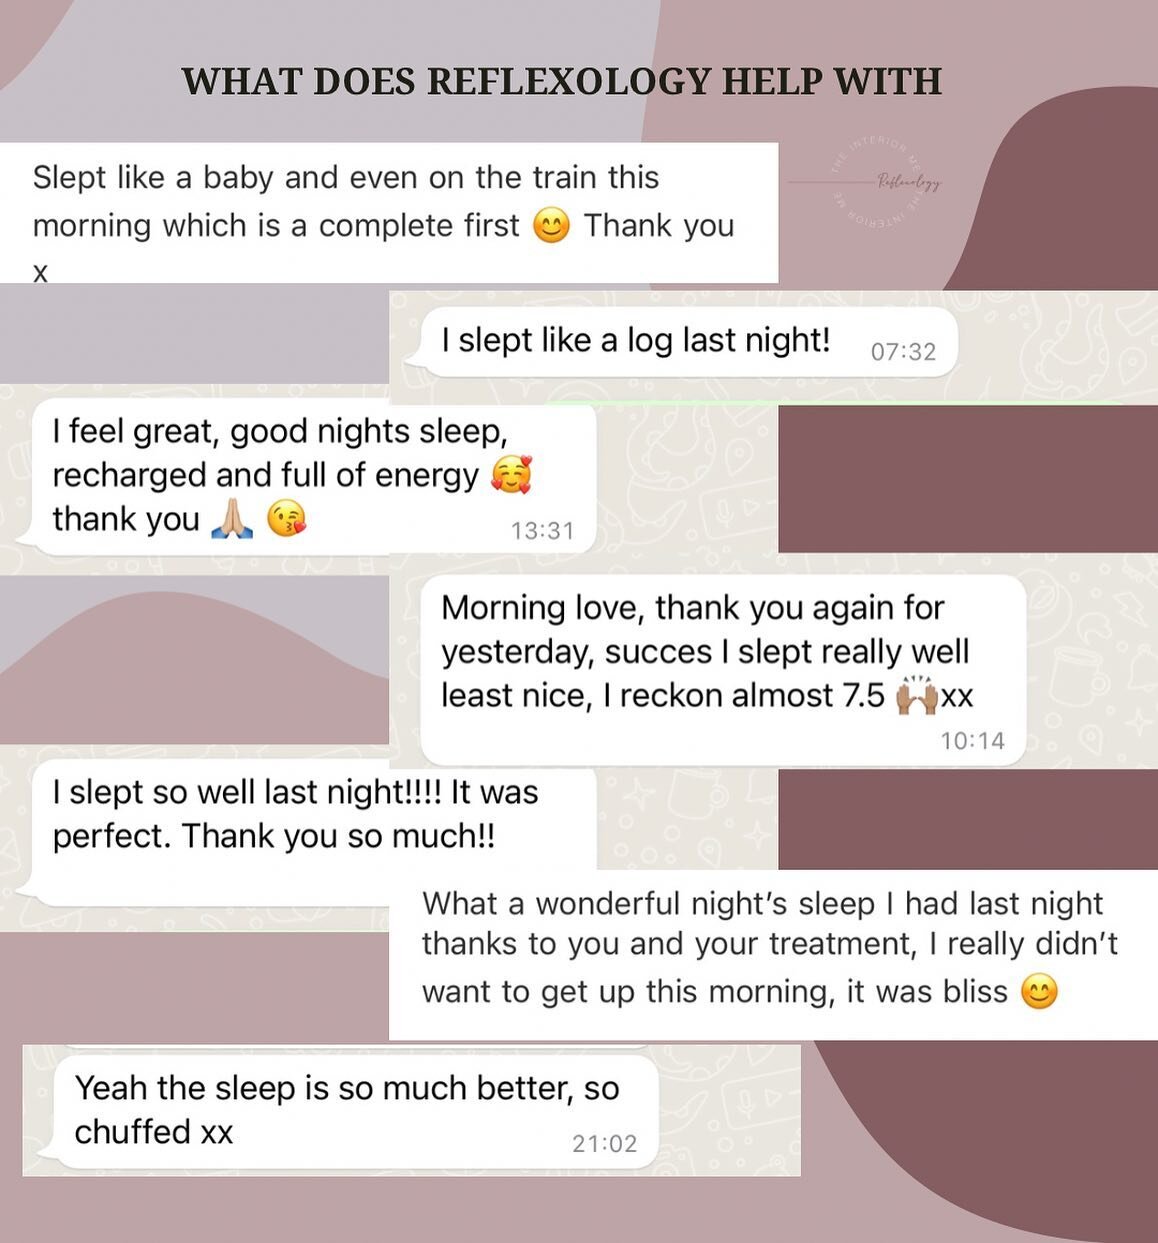 SLEEP. The most important thing we can do for healing our bodies. And it can be helped along with Reflexology! 

We recommend a course of treatments if you do have sleep issues that you would like to address as the treatment puts you in a state of de